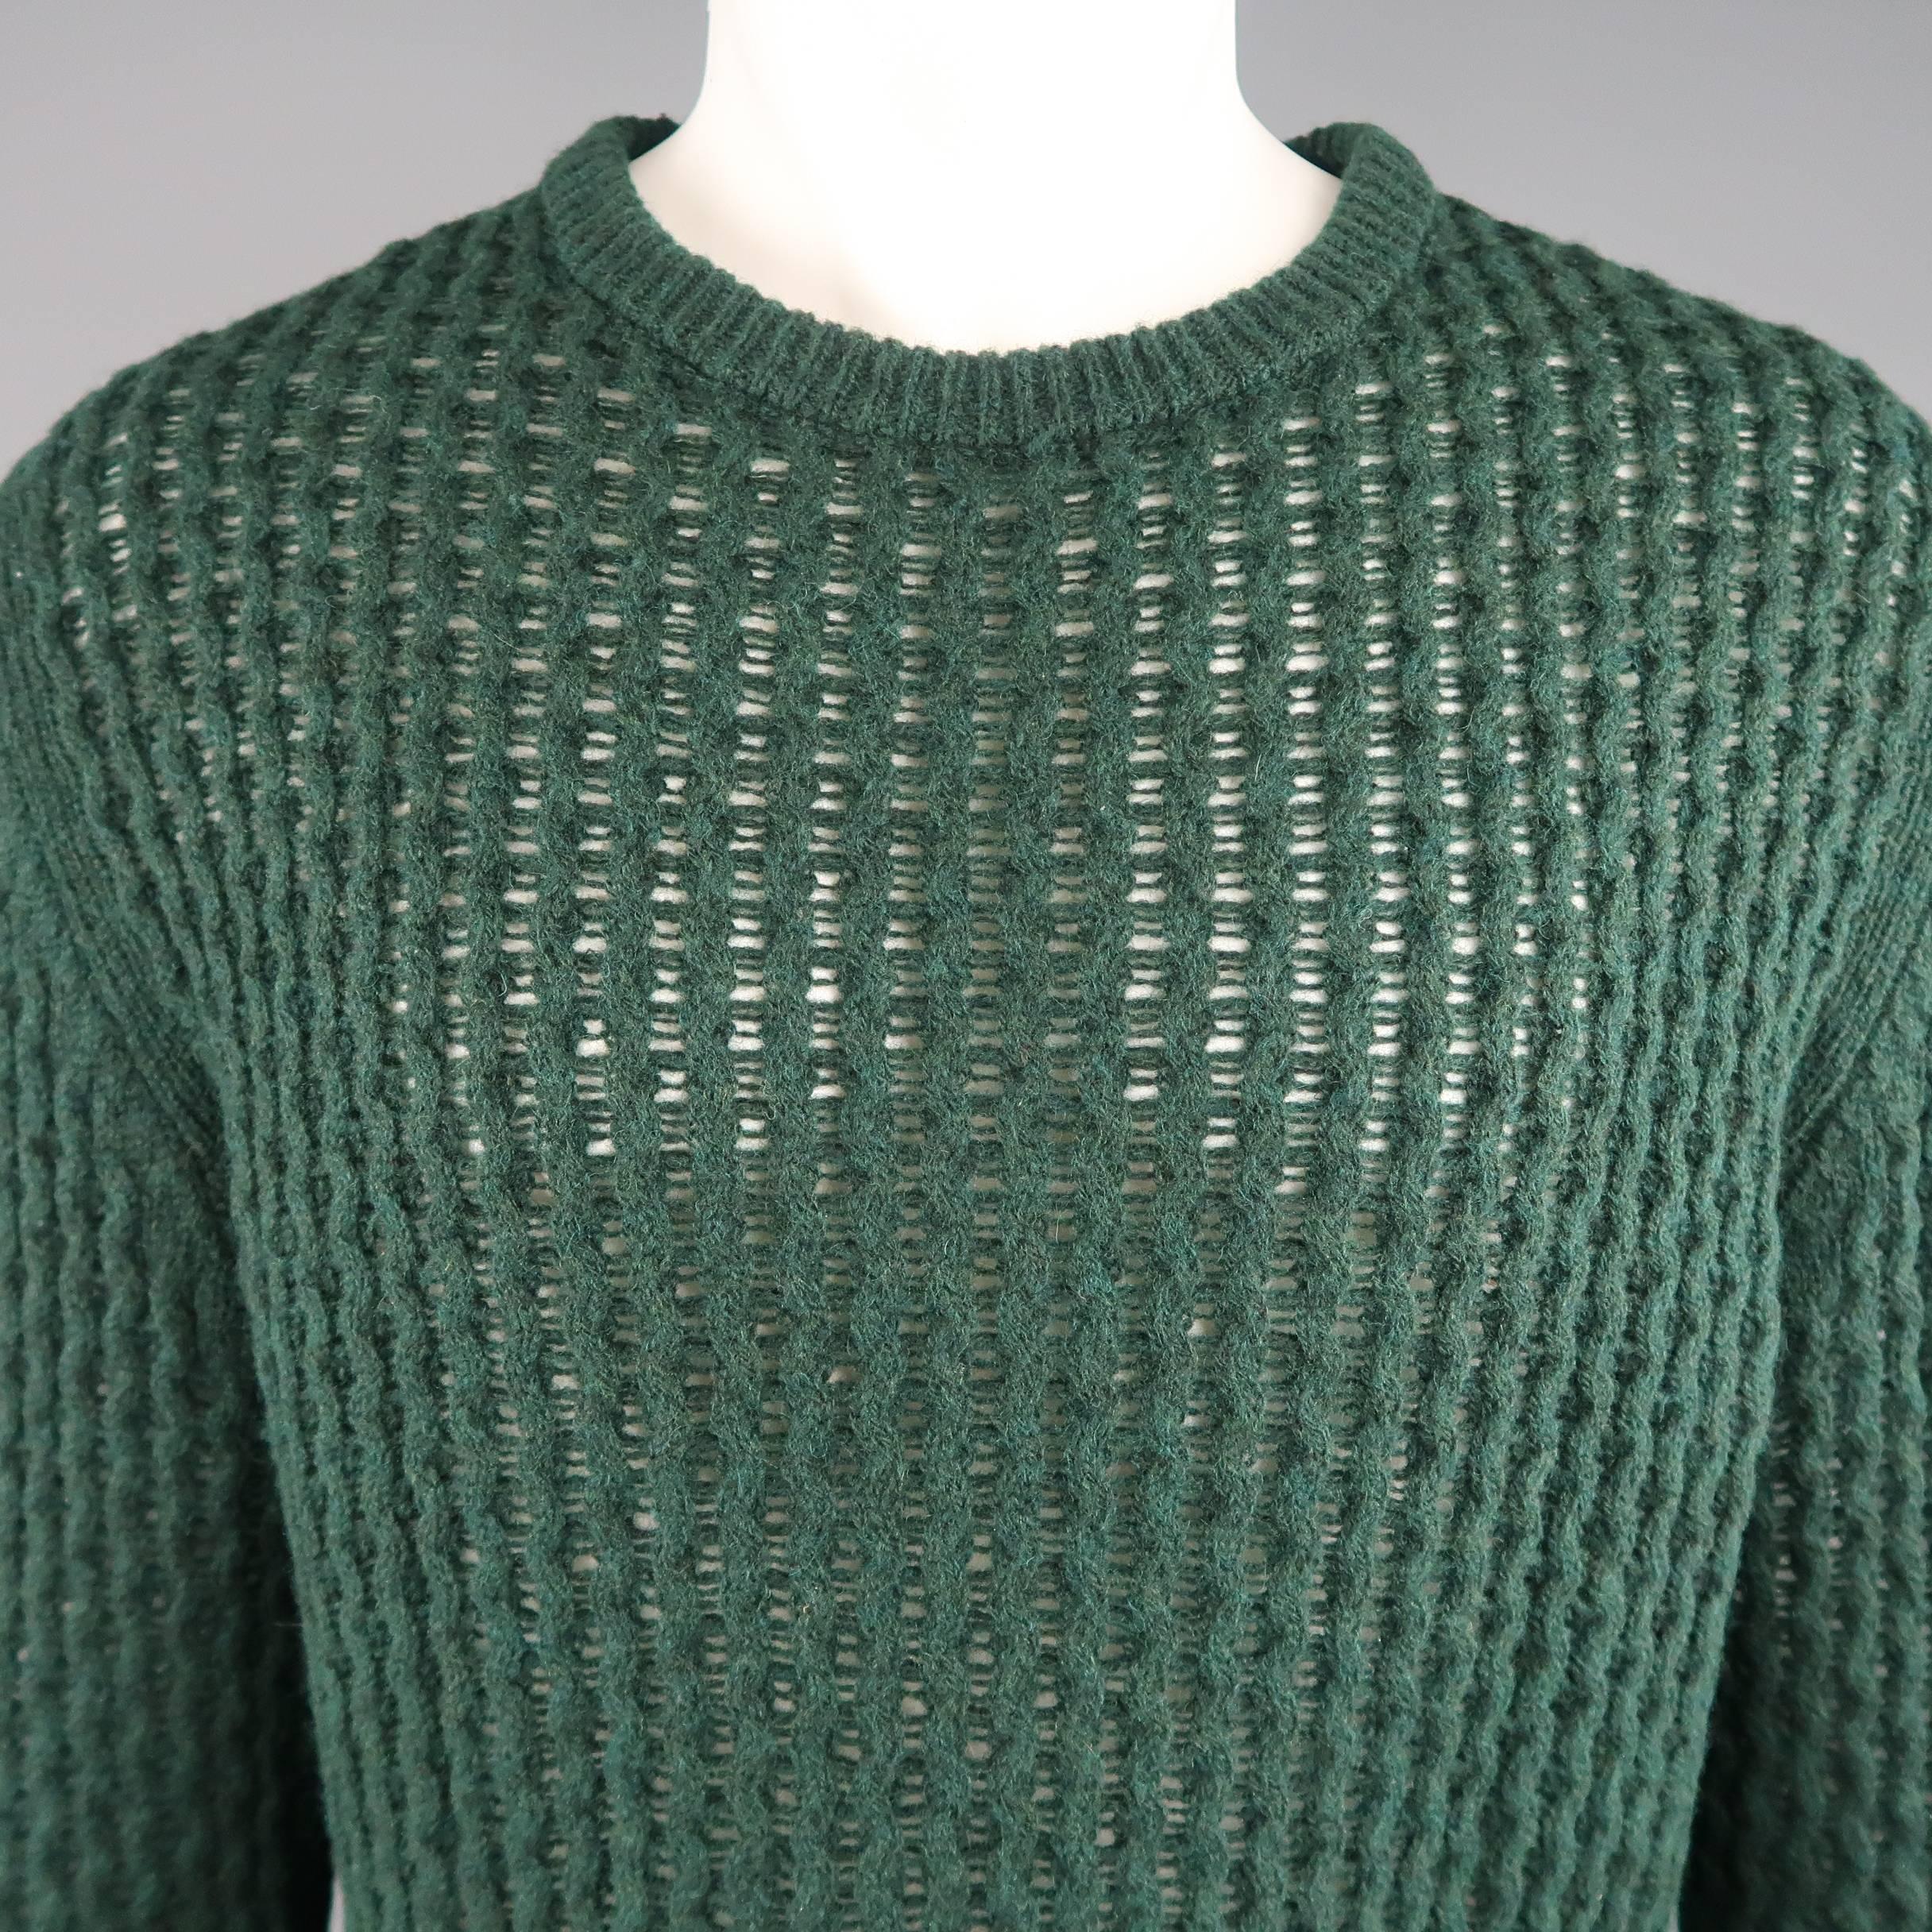 RAF SIMONS pullover sweater comes in a forest green merino wool mesh knit with a rubbed crewneck. Made in Italy.
 
Excellent Pre-Owned Condition.
Marked: M
 
Measurements:
 
Shoulder: 19 in.
Chest: 48 in.
Sleeve: 31 in.
Length: 29 in.
